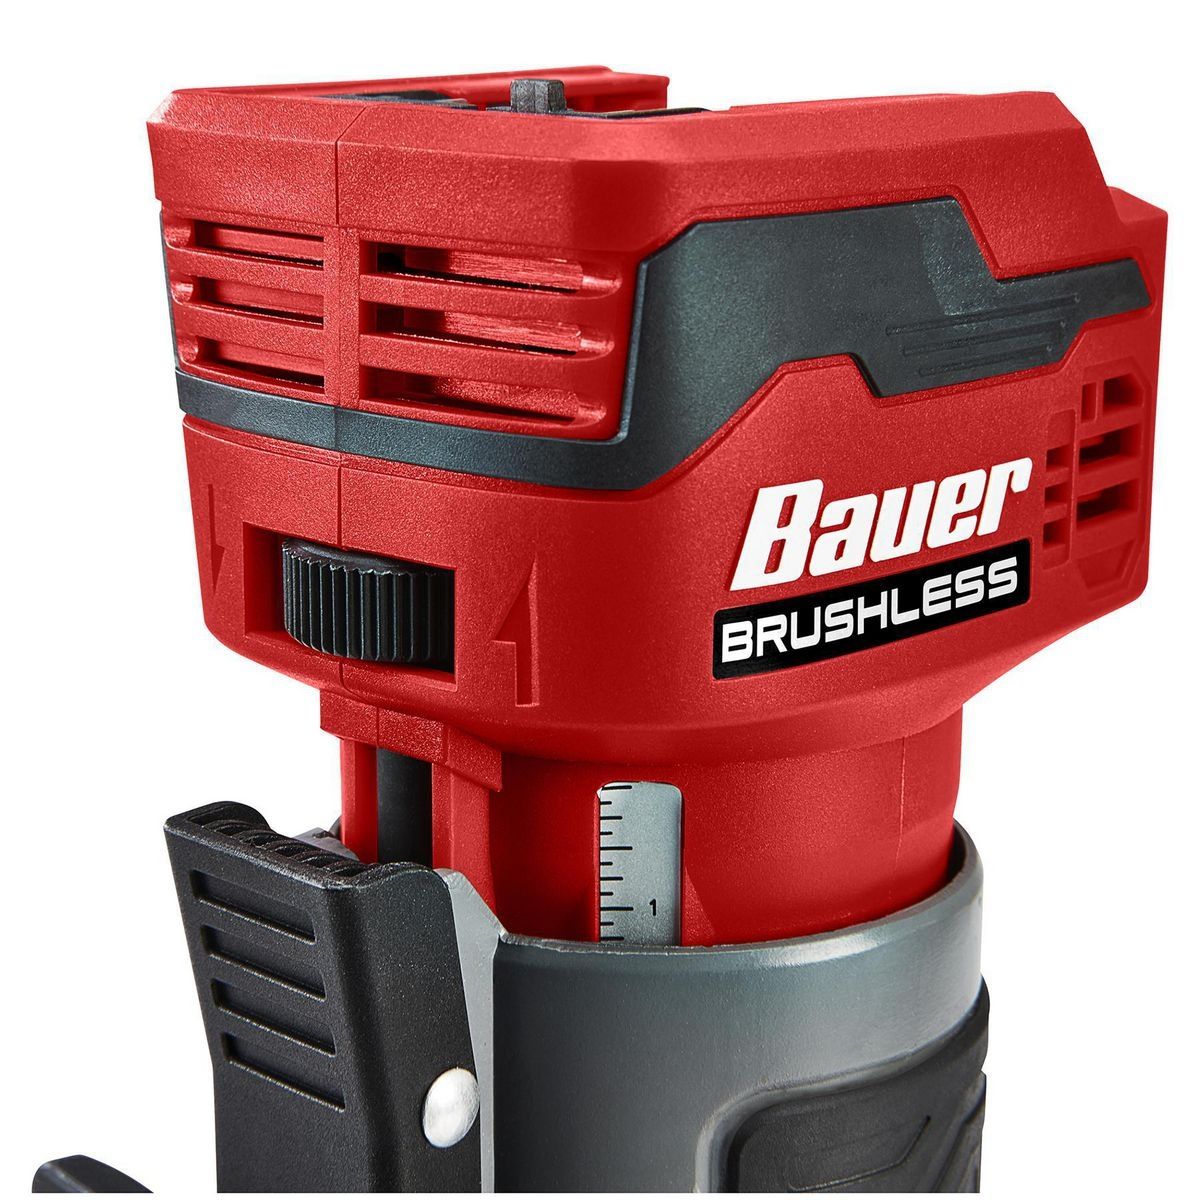 Milwaukee M18 FUEL Brushless Compact Cordless Router (Tool Only